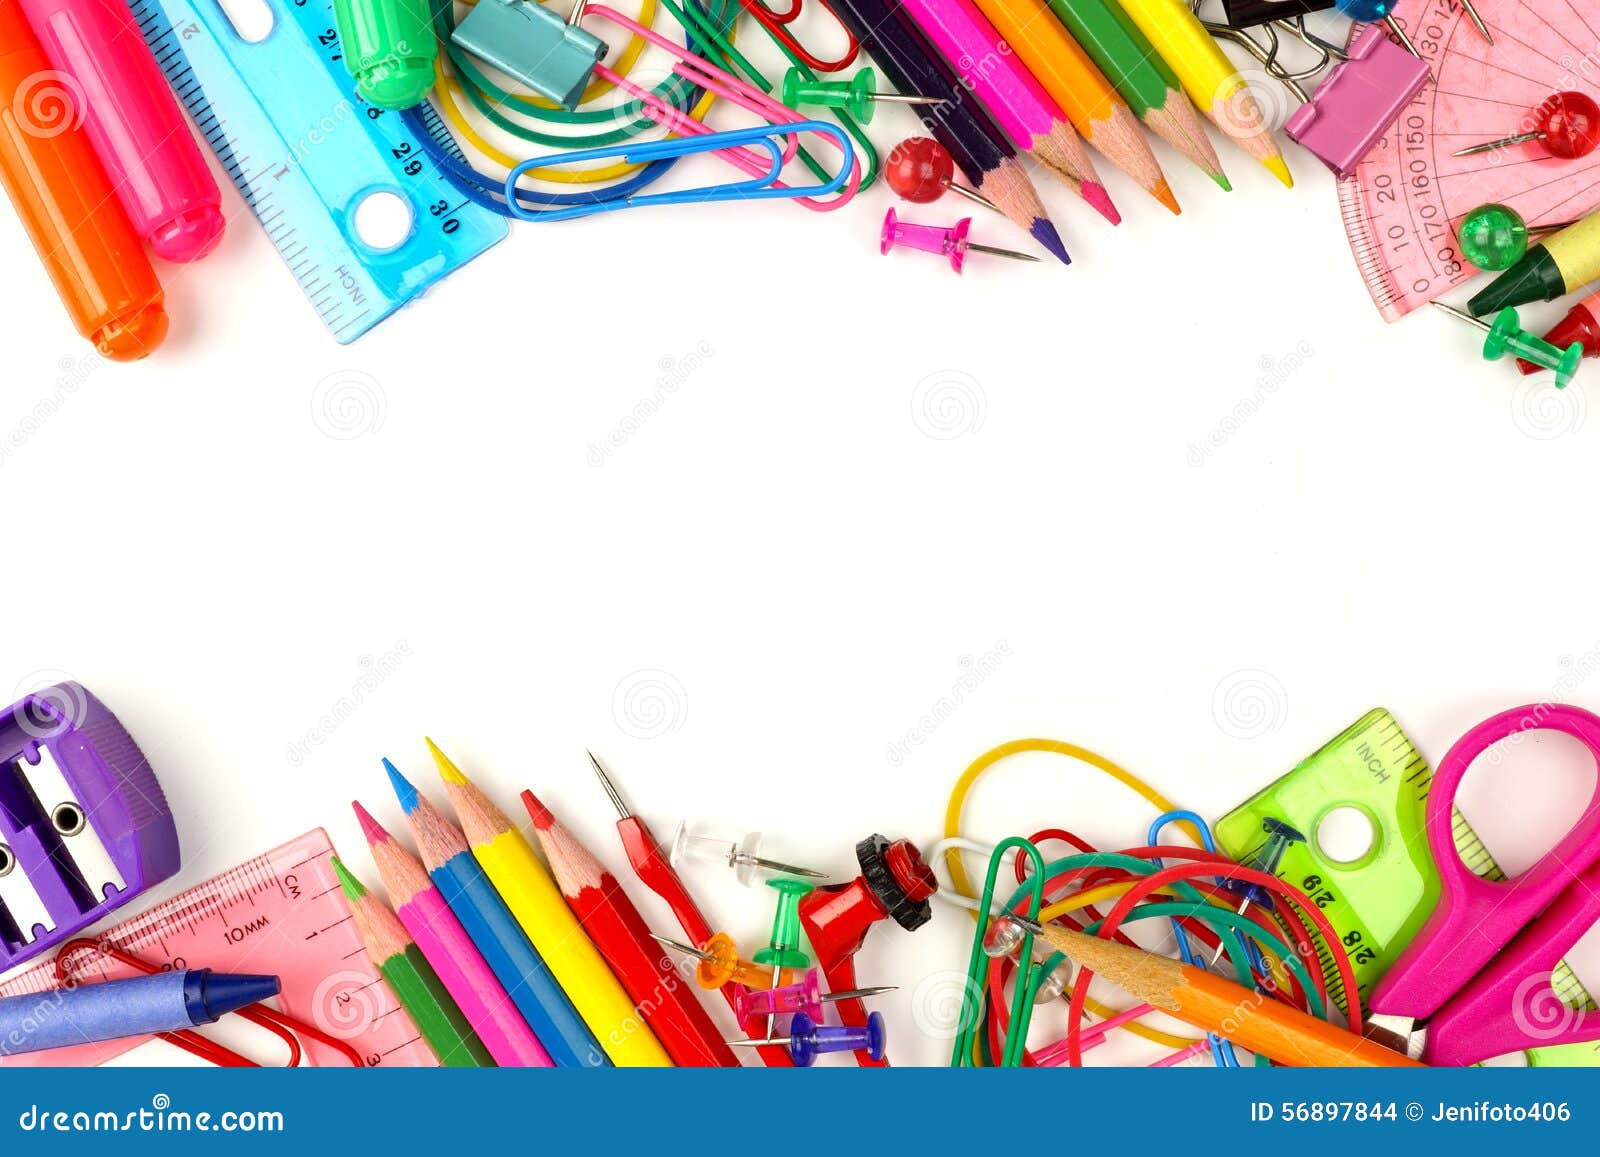 double border of school supplies over white